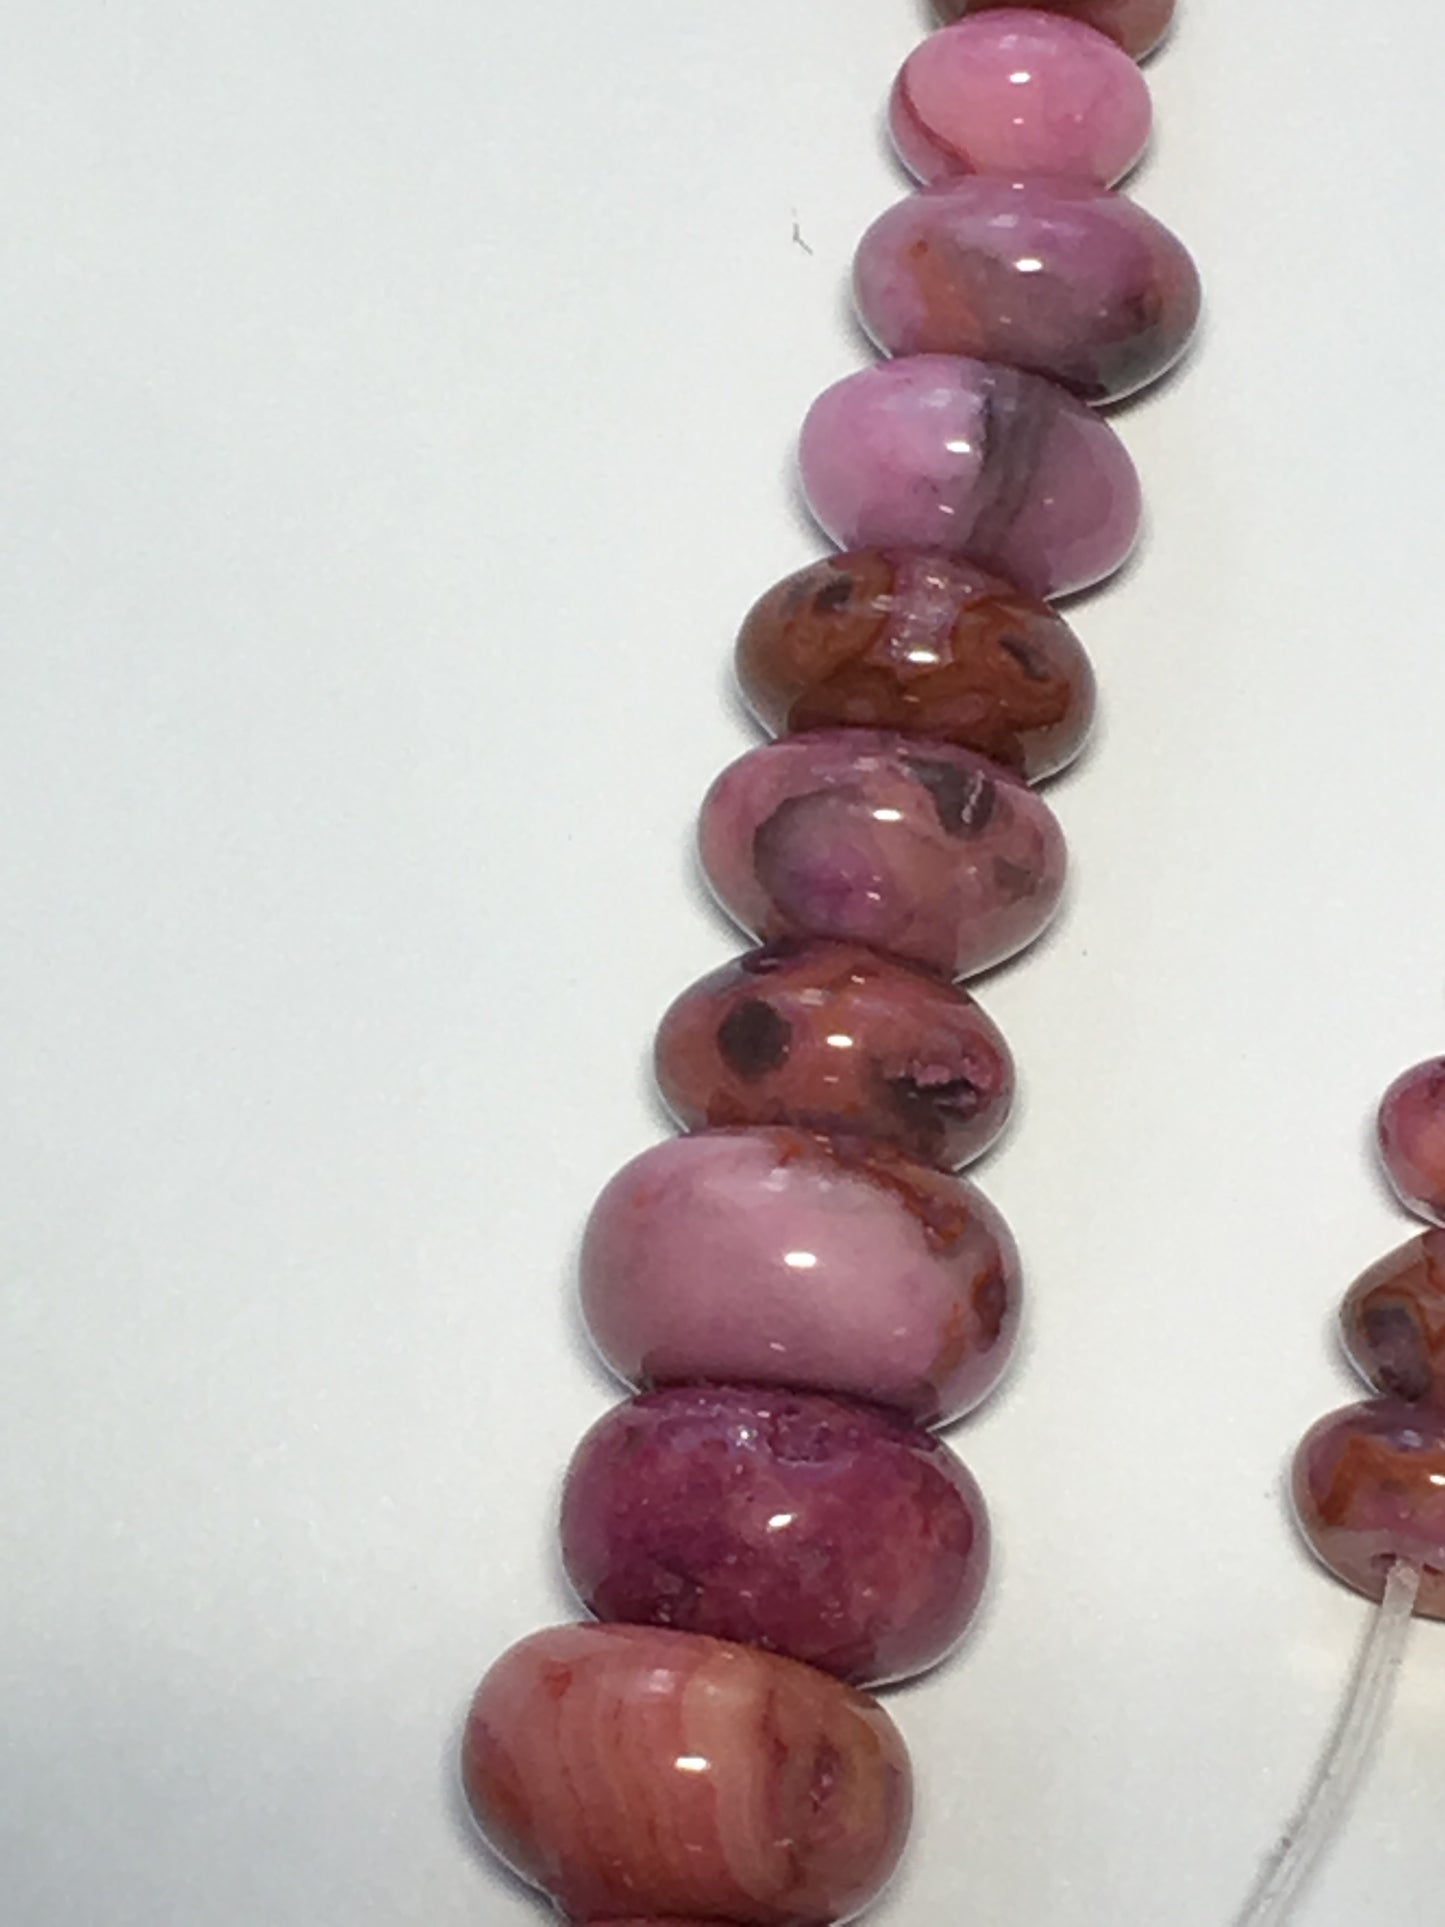 Purple Crazy Lace Agate Rondelles, Semi-Precious Stone Beads, 6-16 mm, 16-Inch Strand, Ready-to-Make Necklace